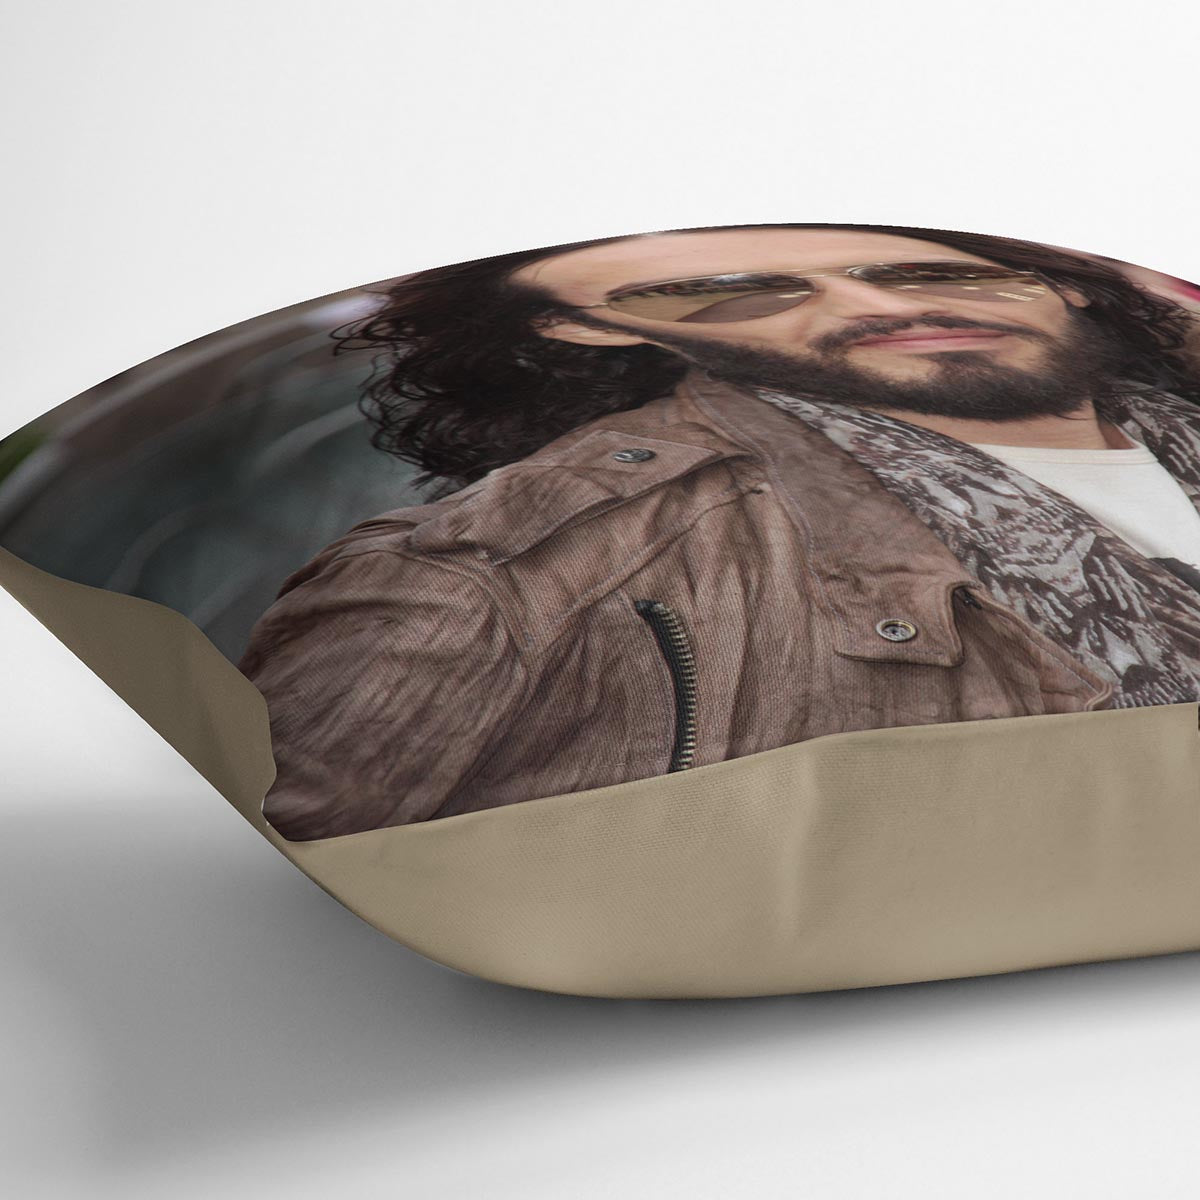 Russell Brand Cushion